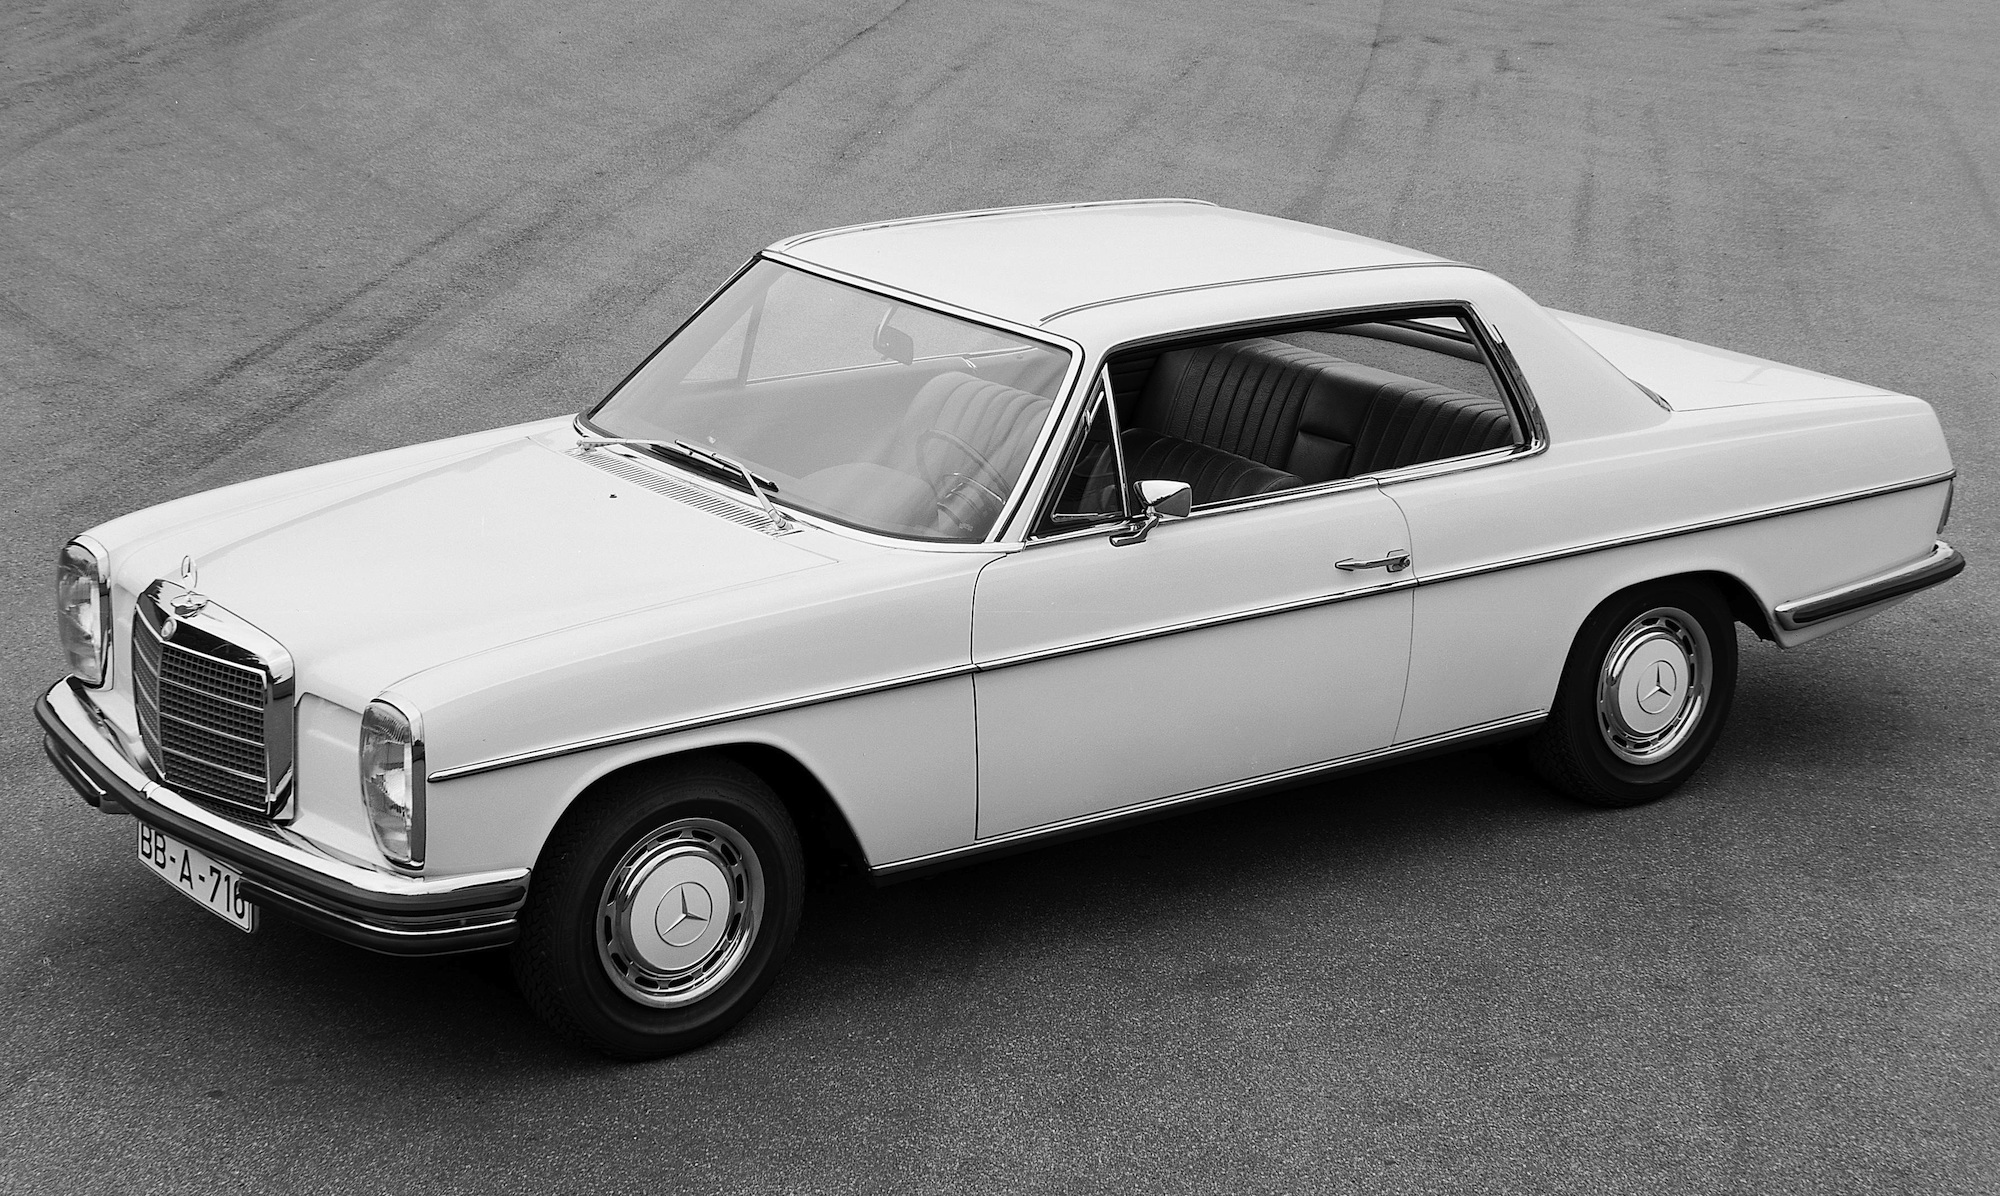 Mercedes W114 coupe celebrates 50 years of movement